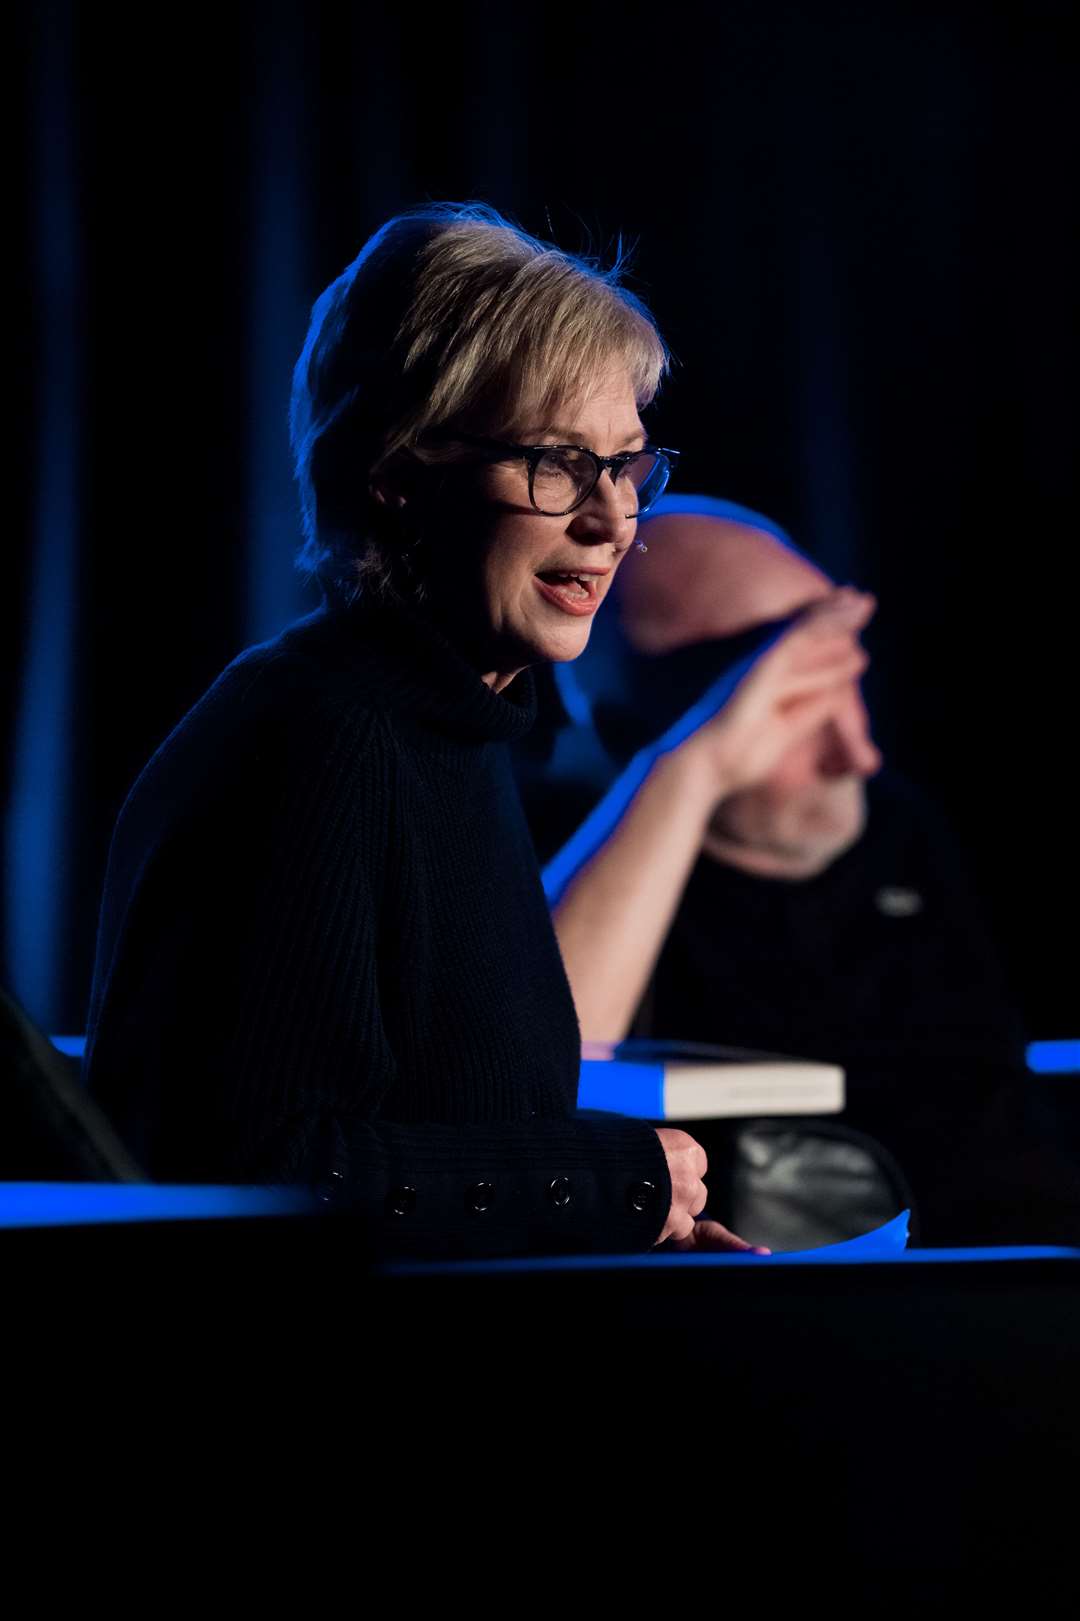 The discussion was hosted by Sally Magnusson. Picture: Richard Frew Photography